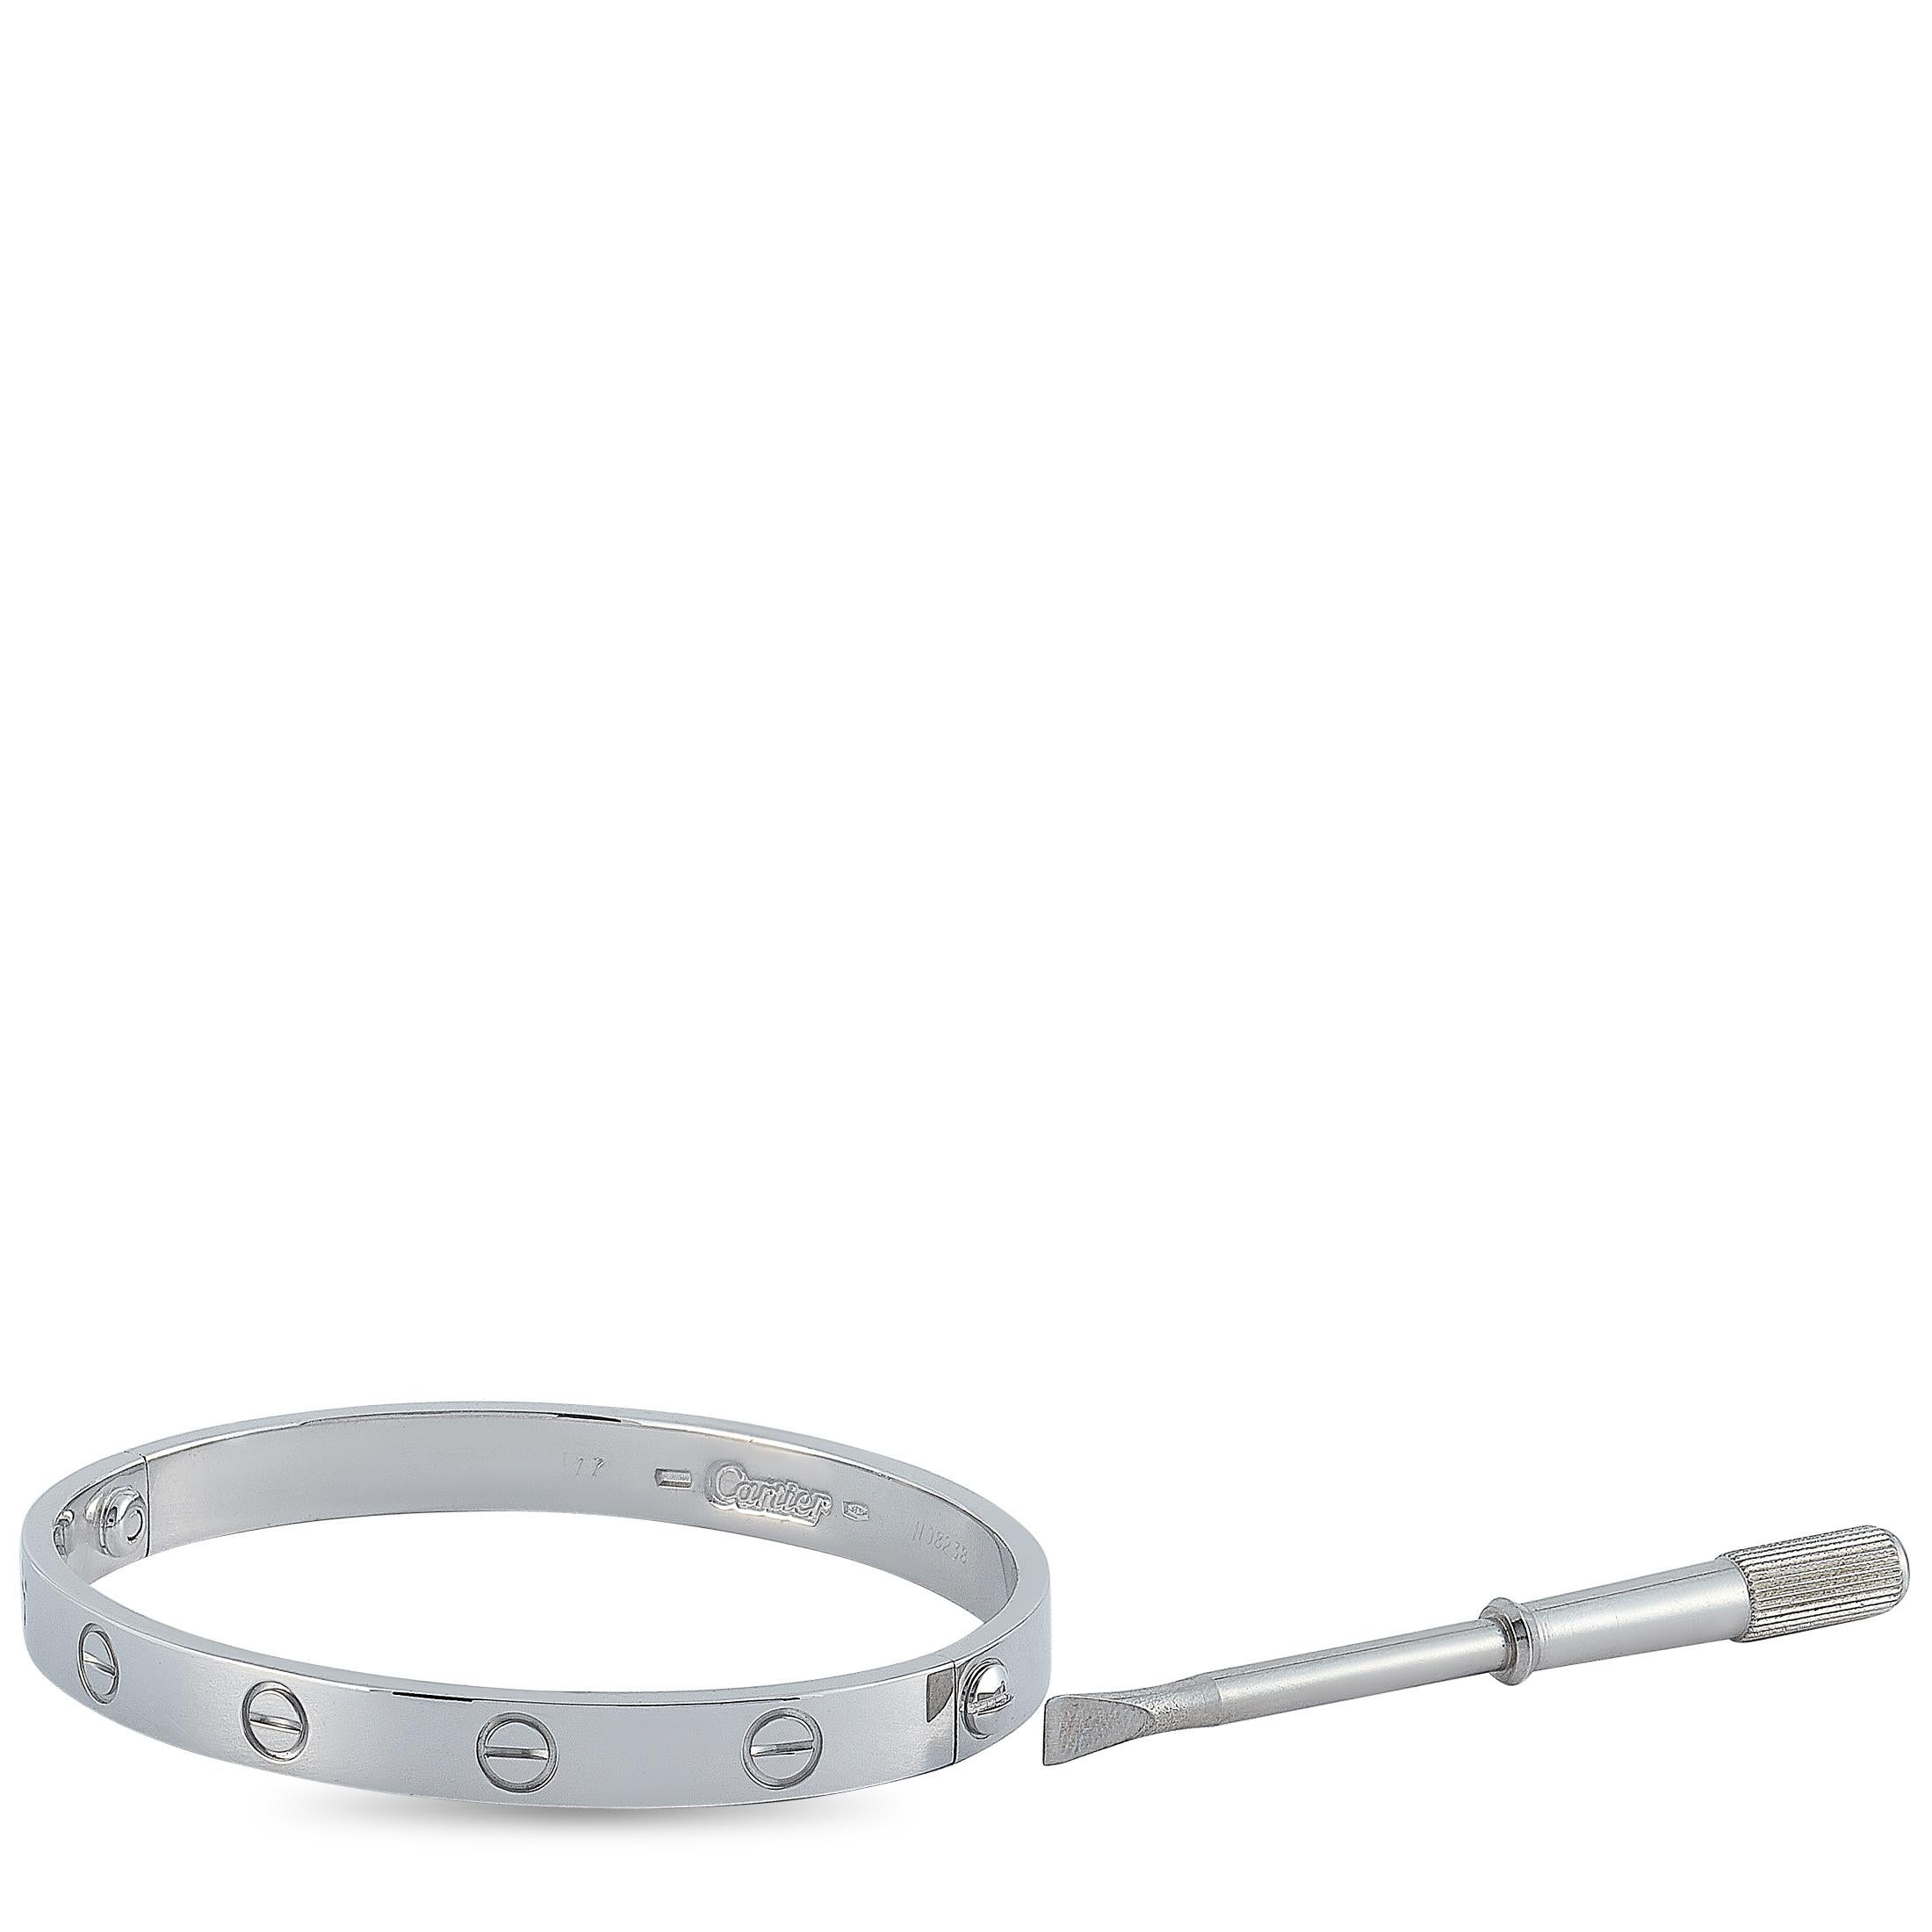 The Cartier “LOVE” bracelet is crafted from 18K white gold and measures 6.7” in length. The bracelet weighs 33.2 grams and is delivered with a screwdriver.